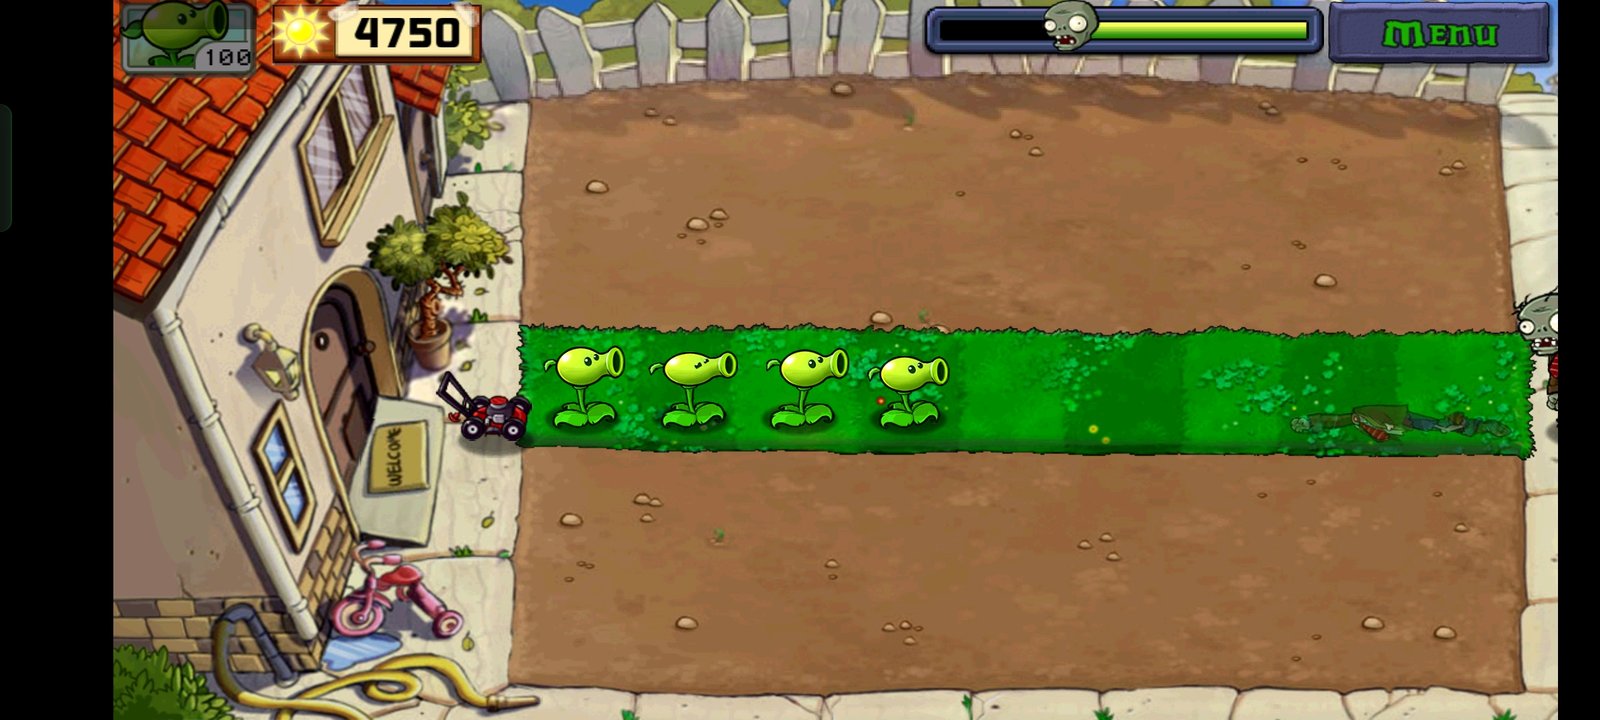 Download Plants vs Zombies APK v3.4.3 Mod for Android